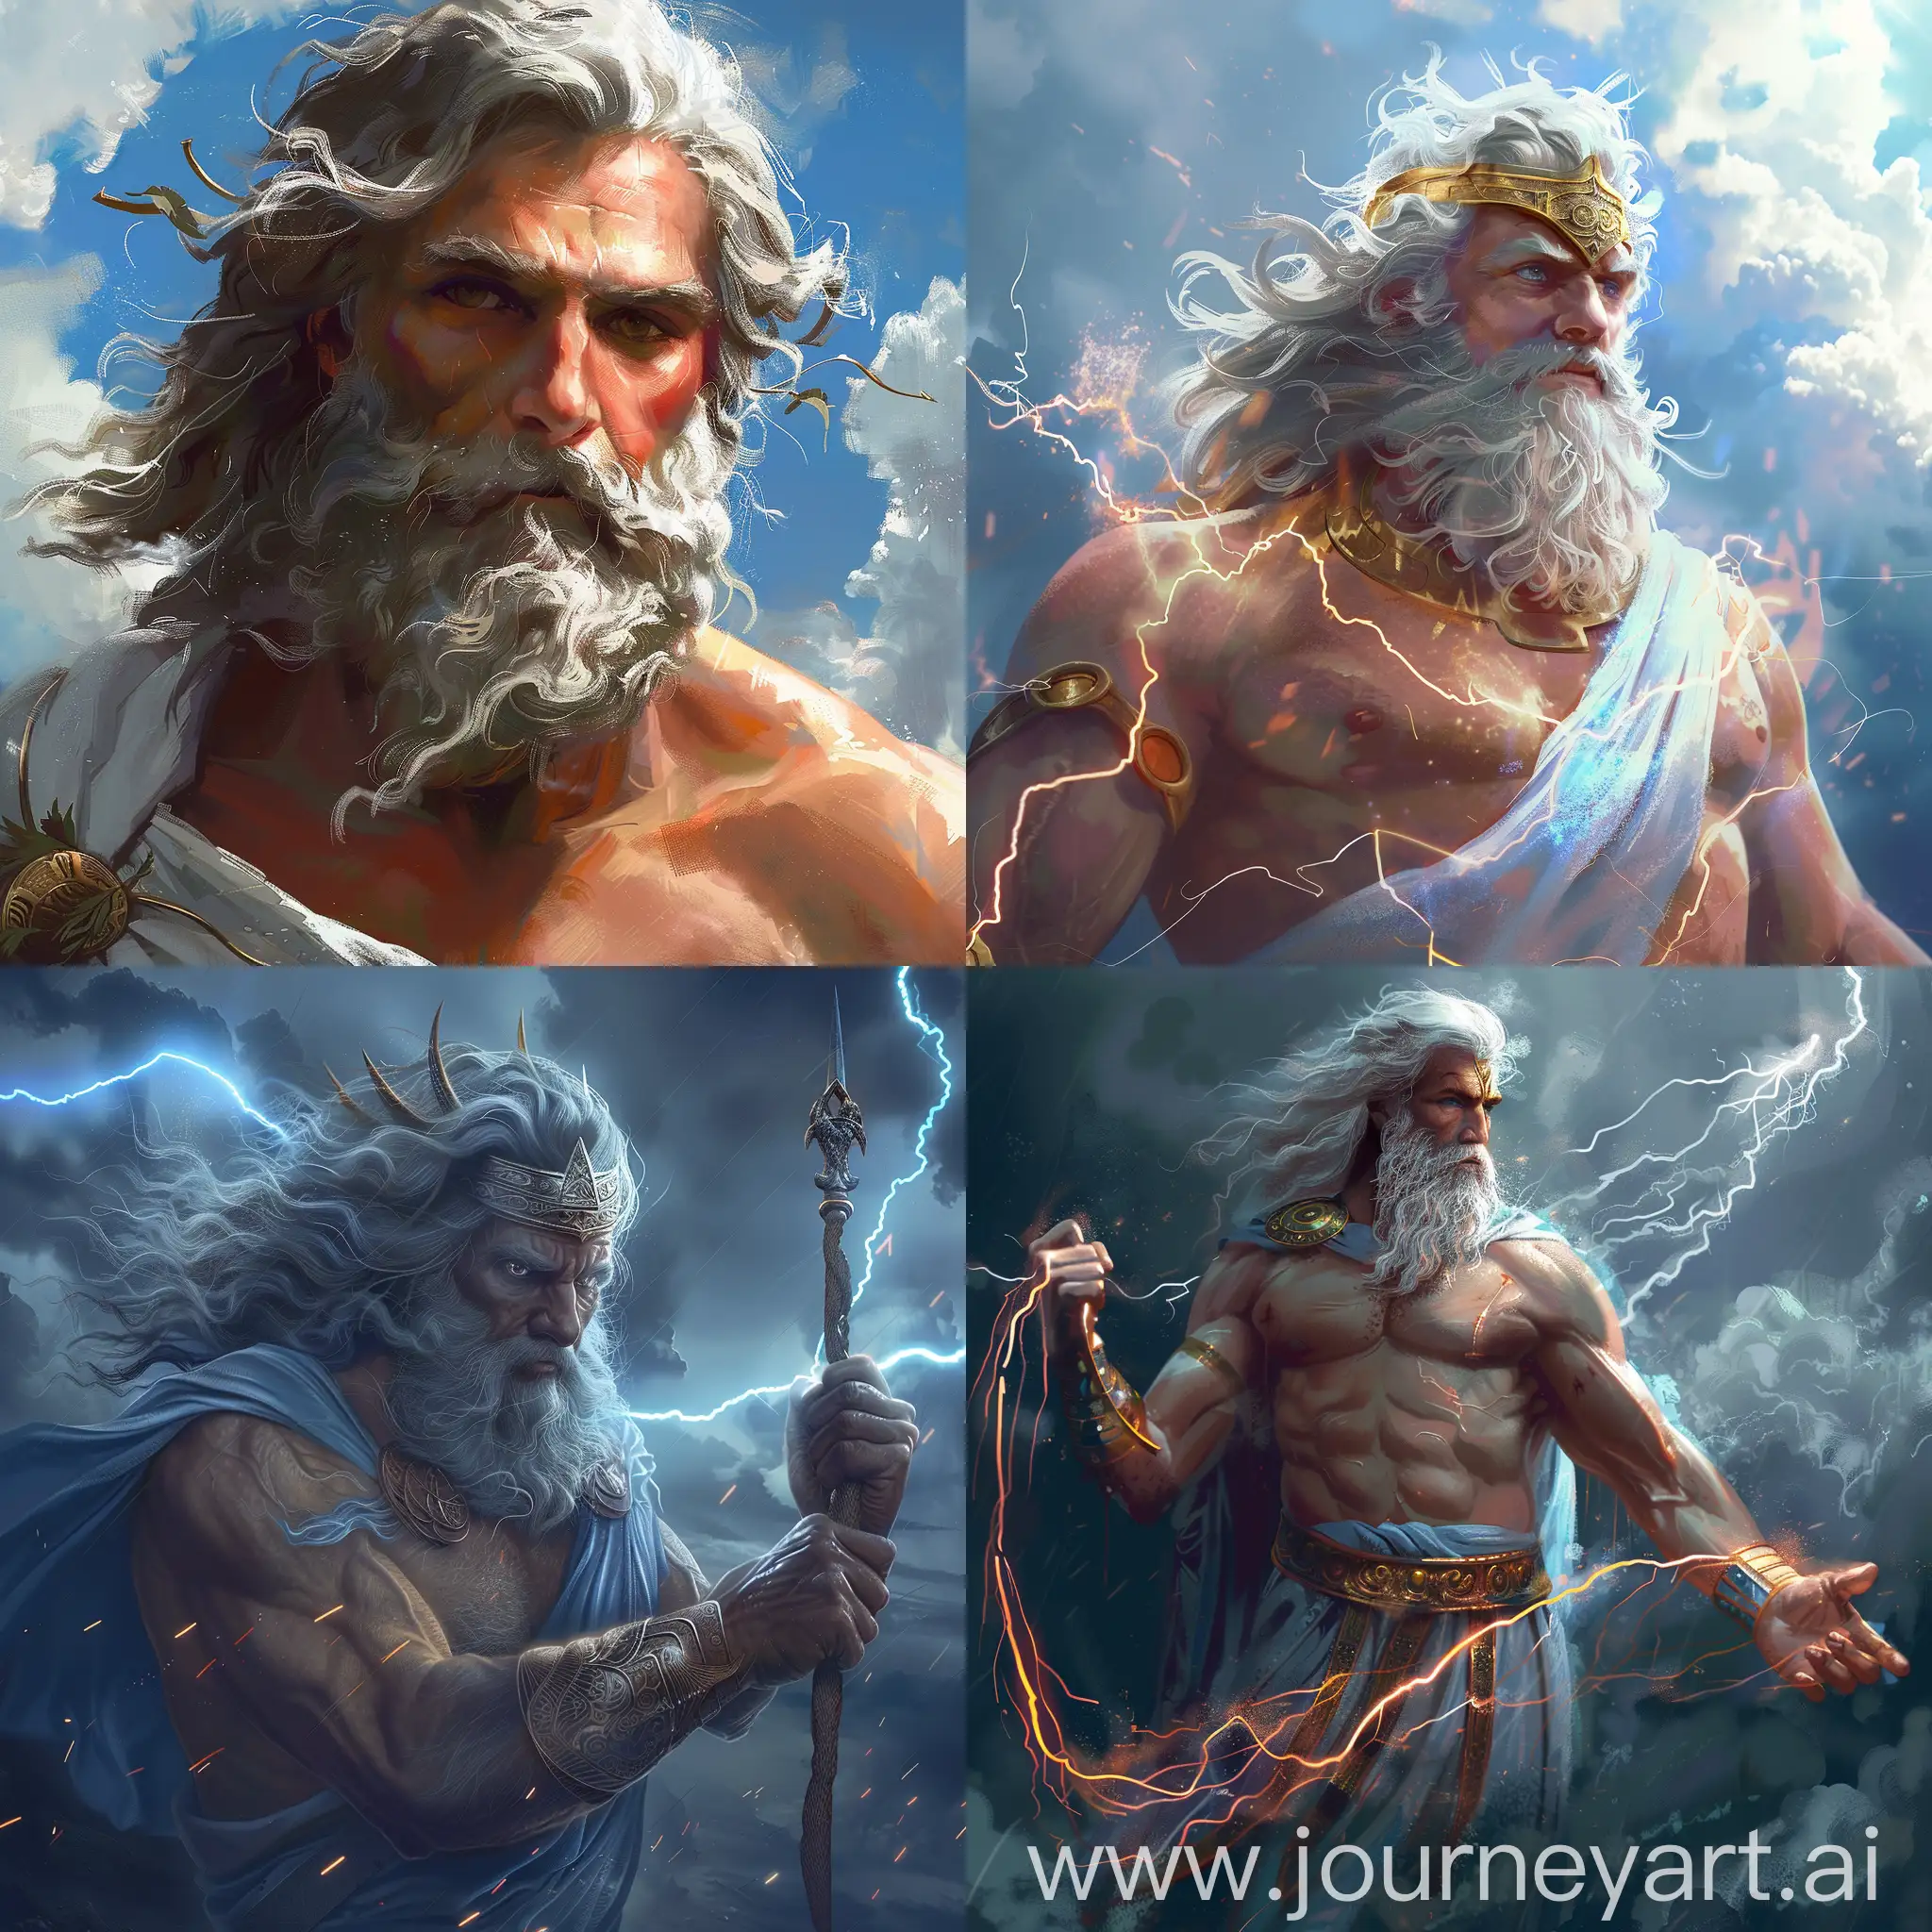 Realistic-Depiction-of-God-Zeus-in-a-Square-Composition